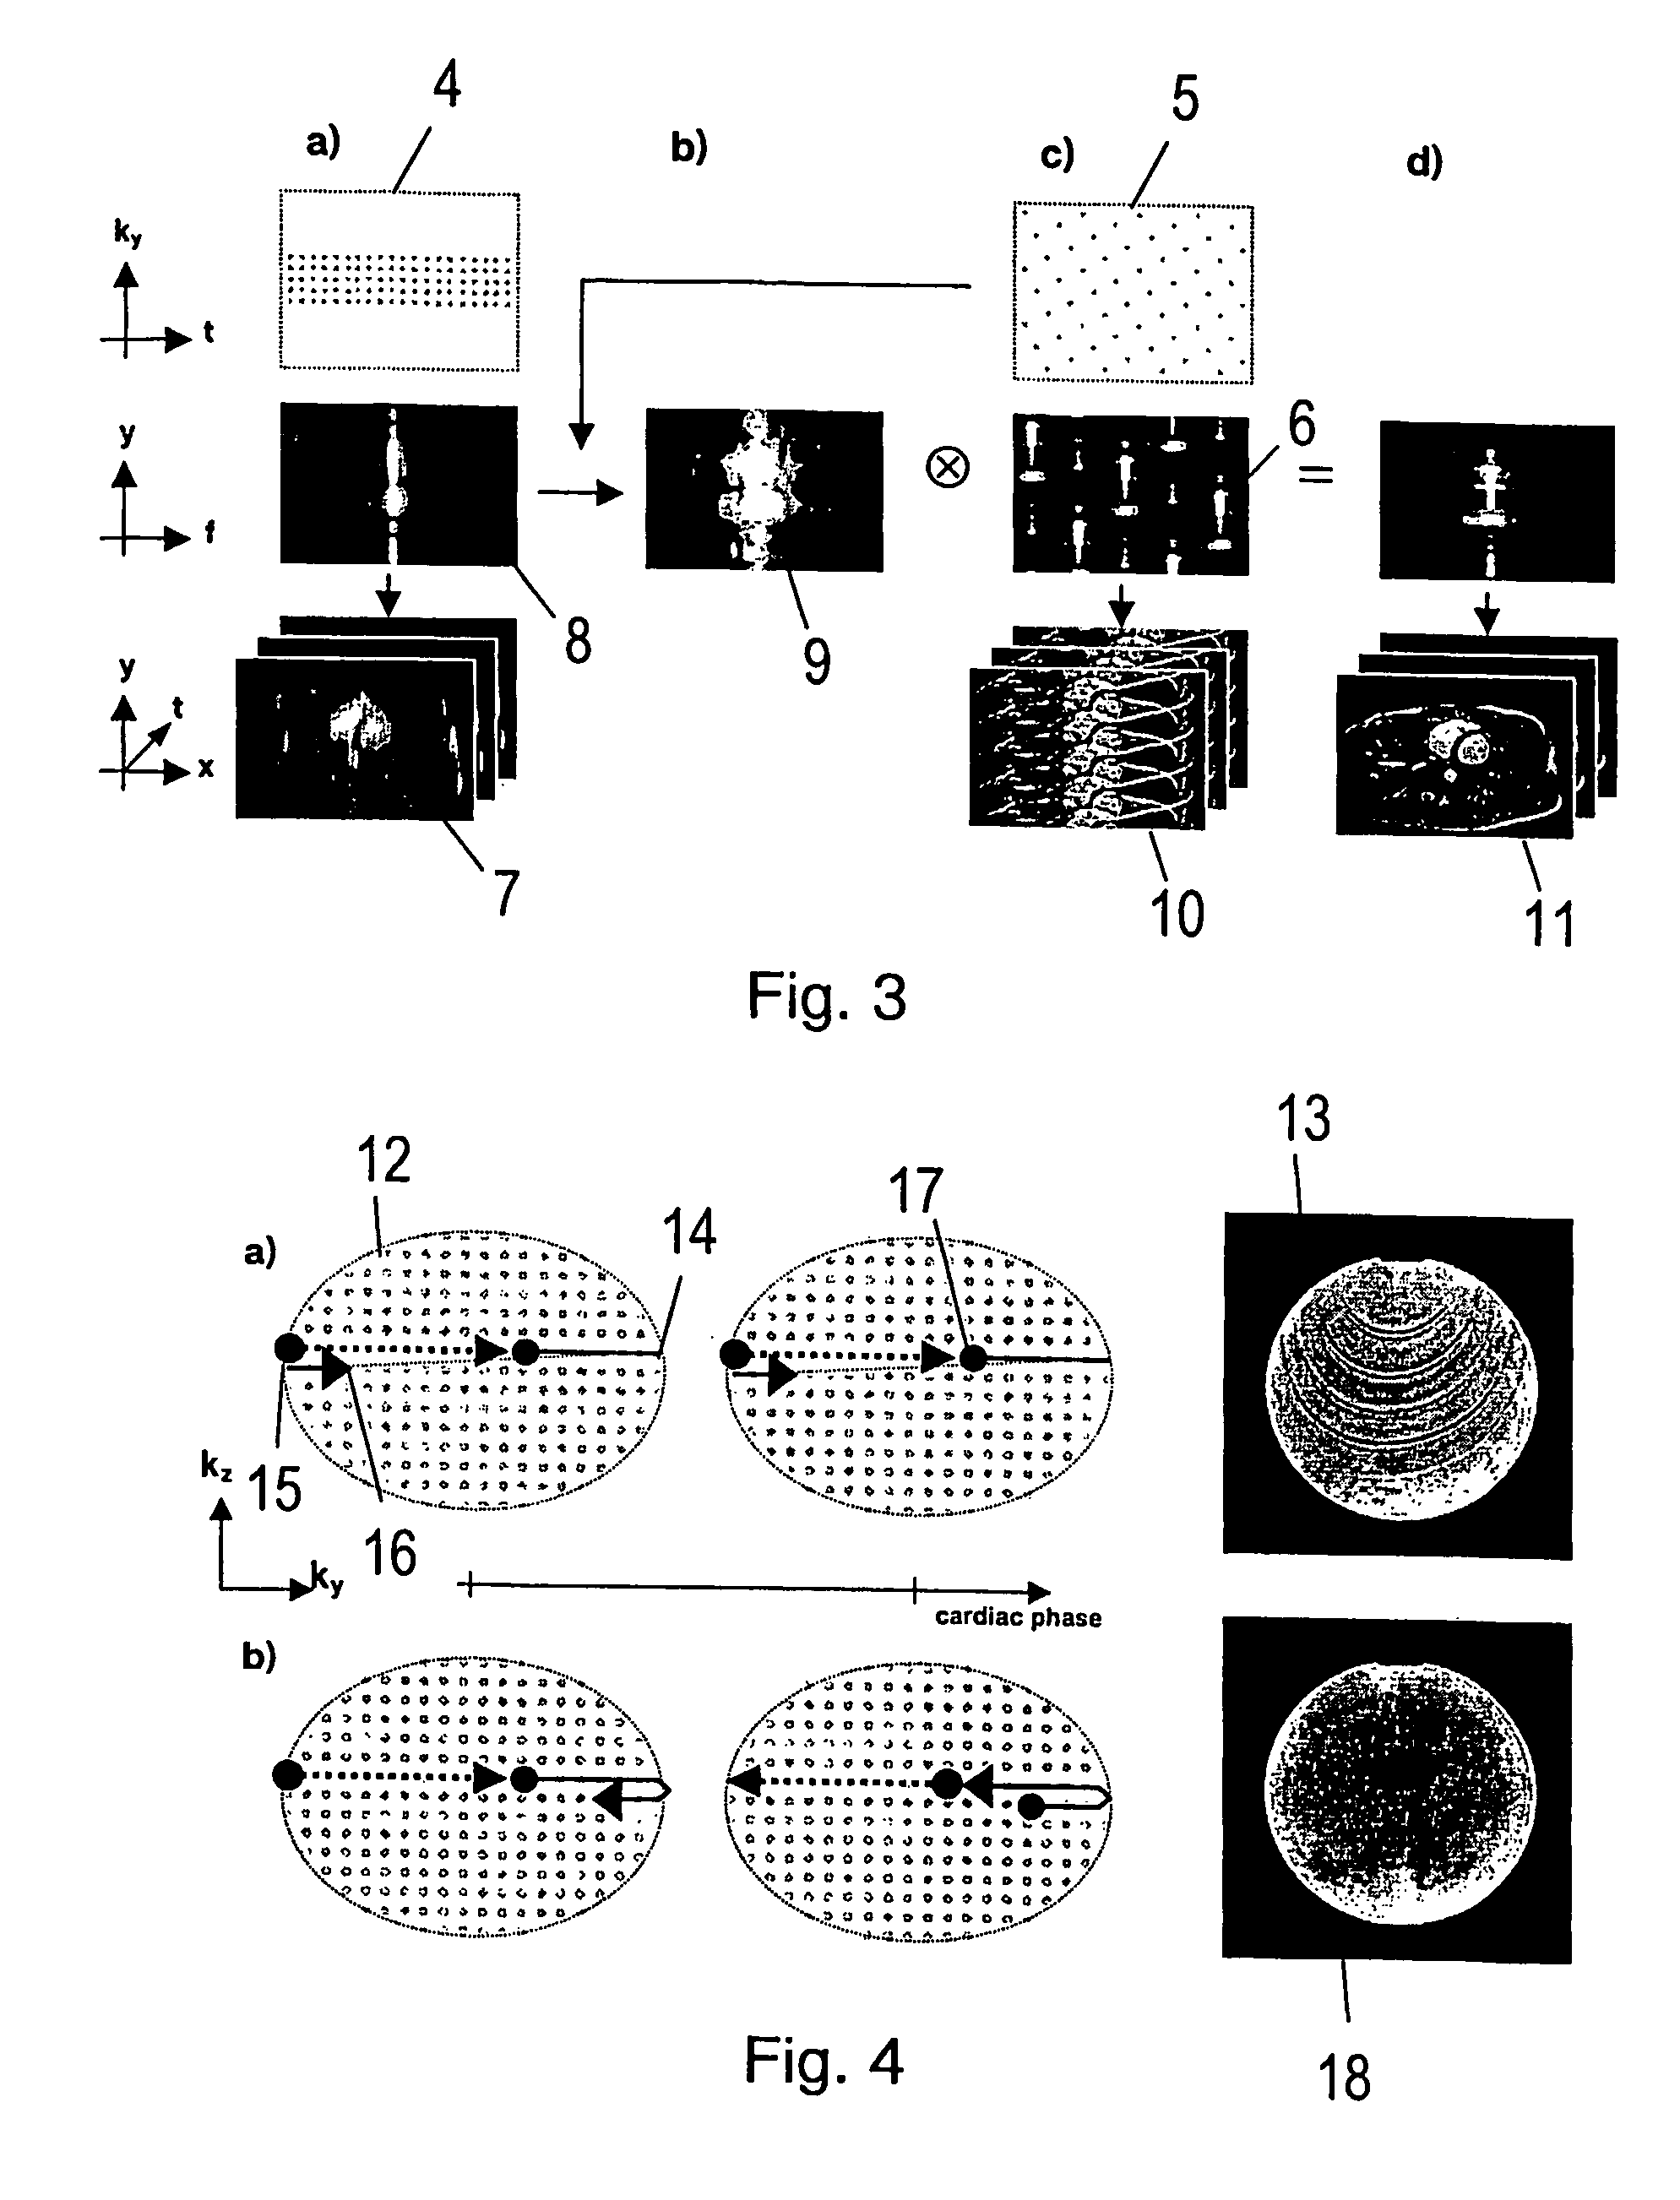 System and method of magnetic resonance imaging for producing successive magnetic resonance images